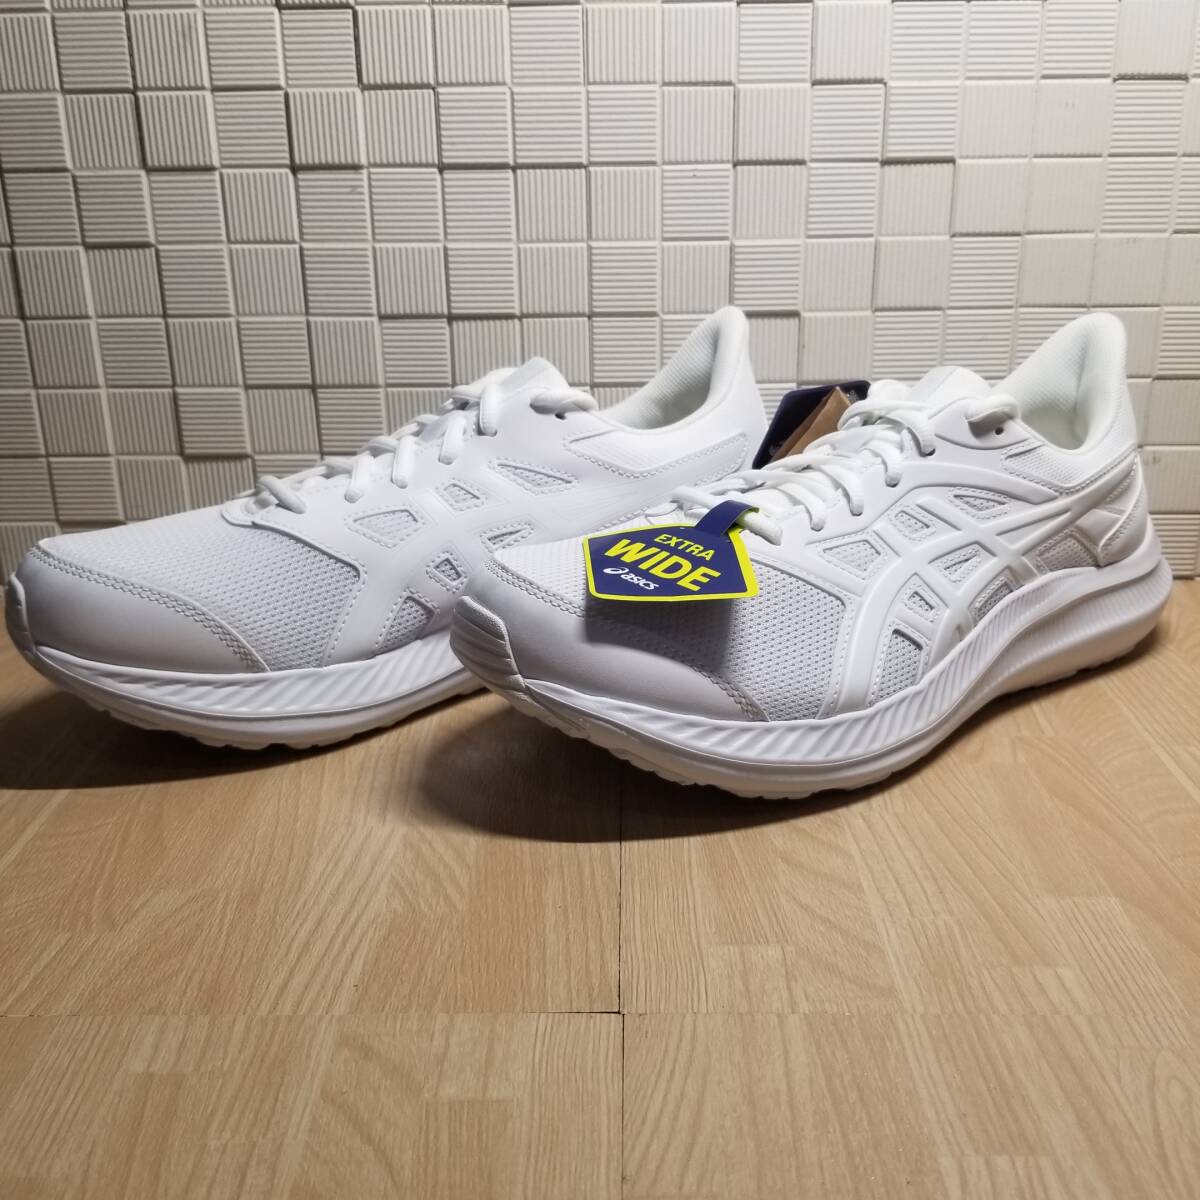  free shipping * new goods unused!! Asics ASICS running shoes sneakers / JOLT 4 EXTRA WIDE/ white white 25.5cm